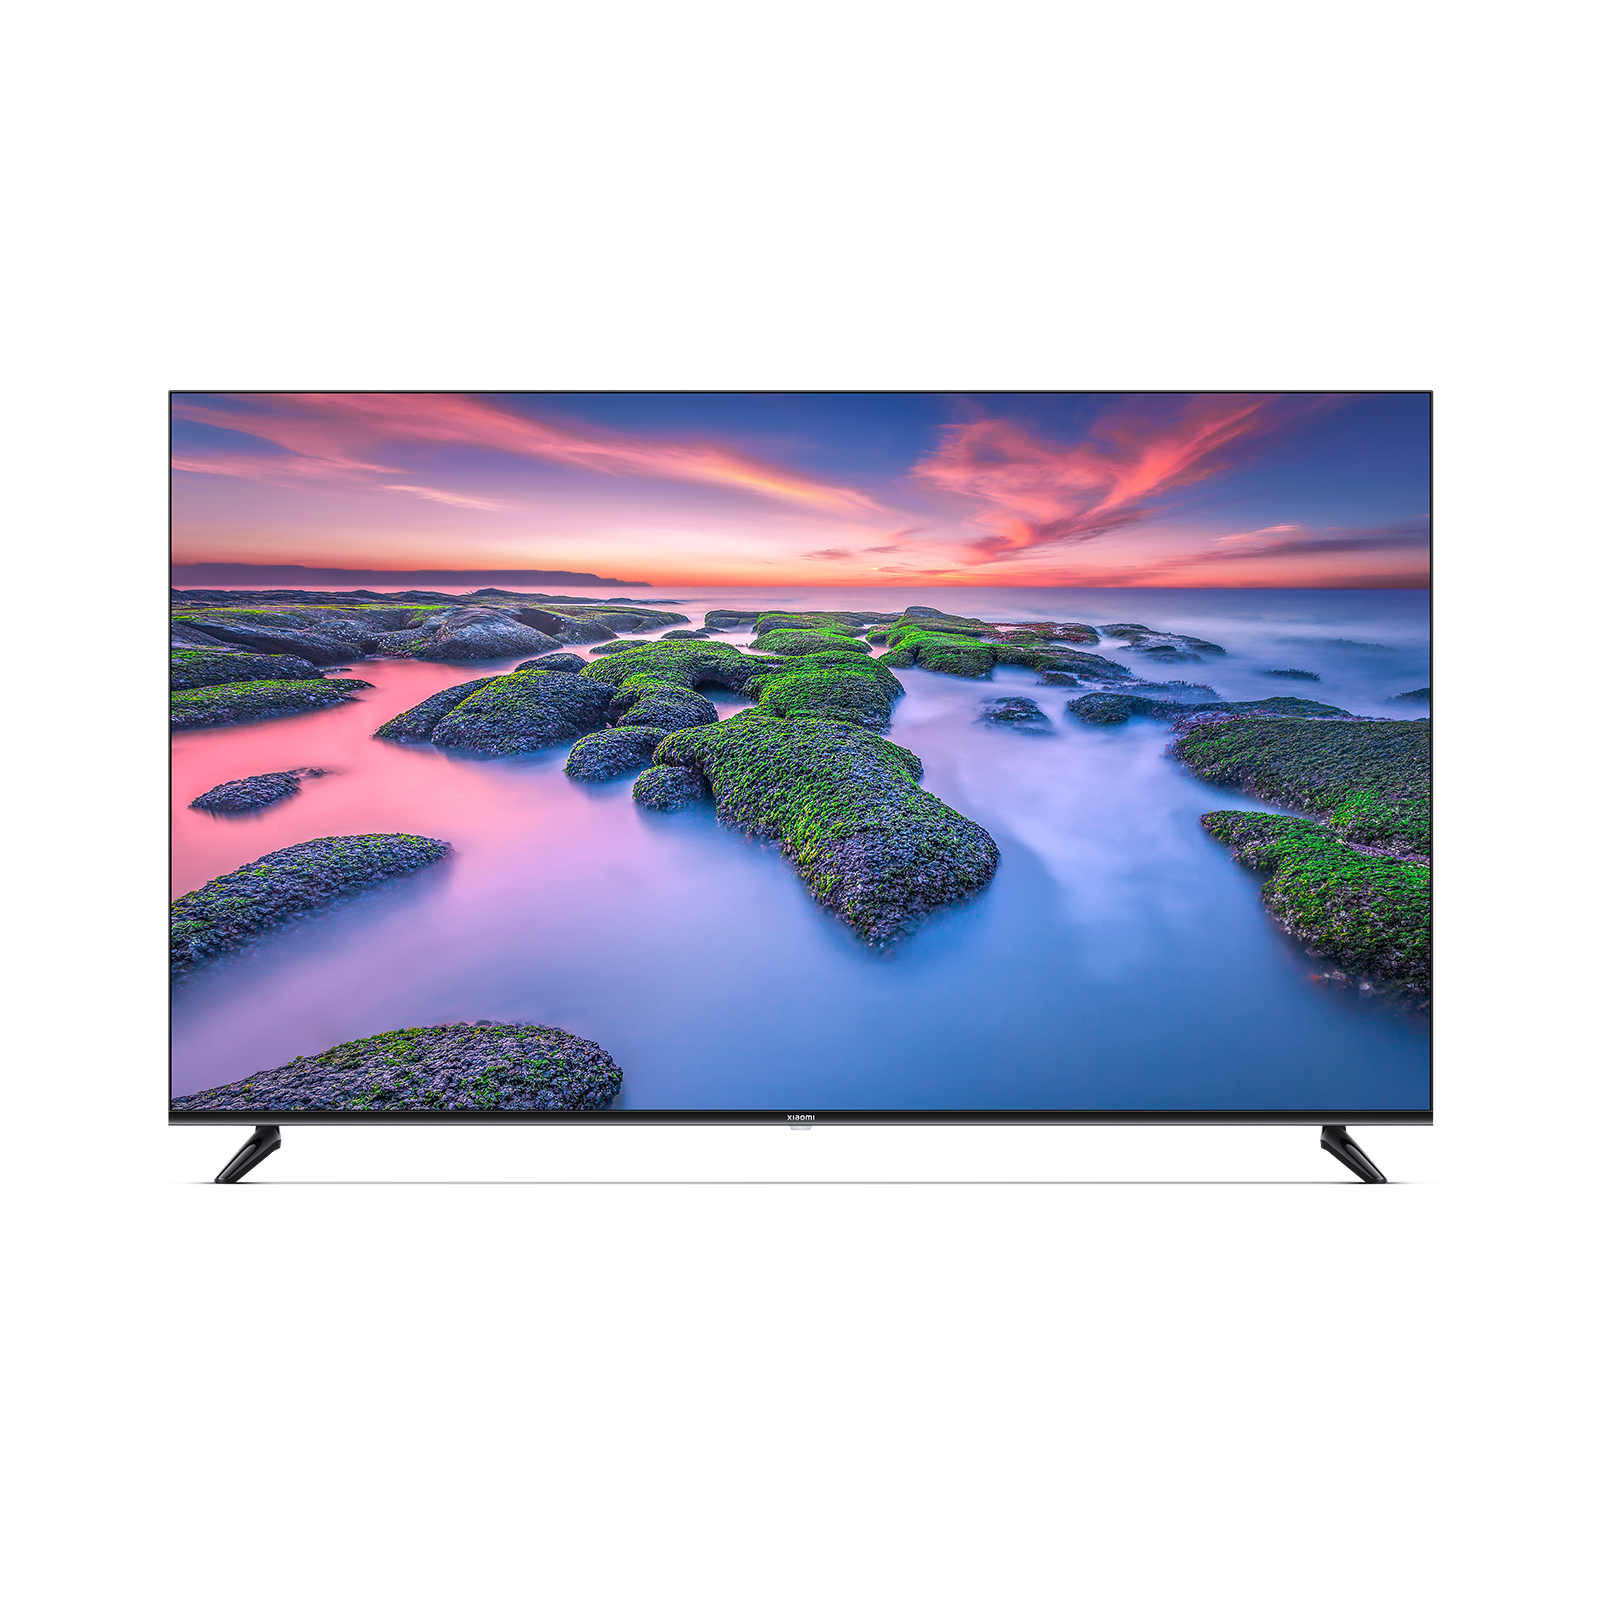 Xiaomi Mi TV P1 50 vs Xiaomi TV A2 58: What is the difference?